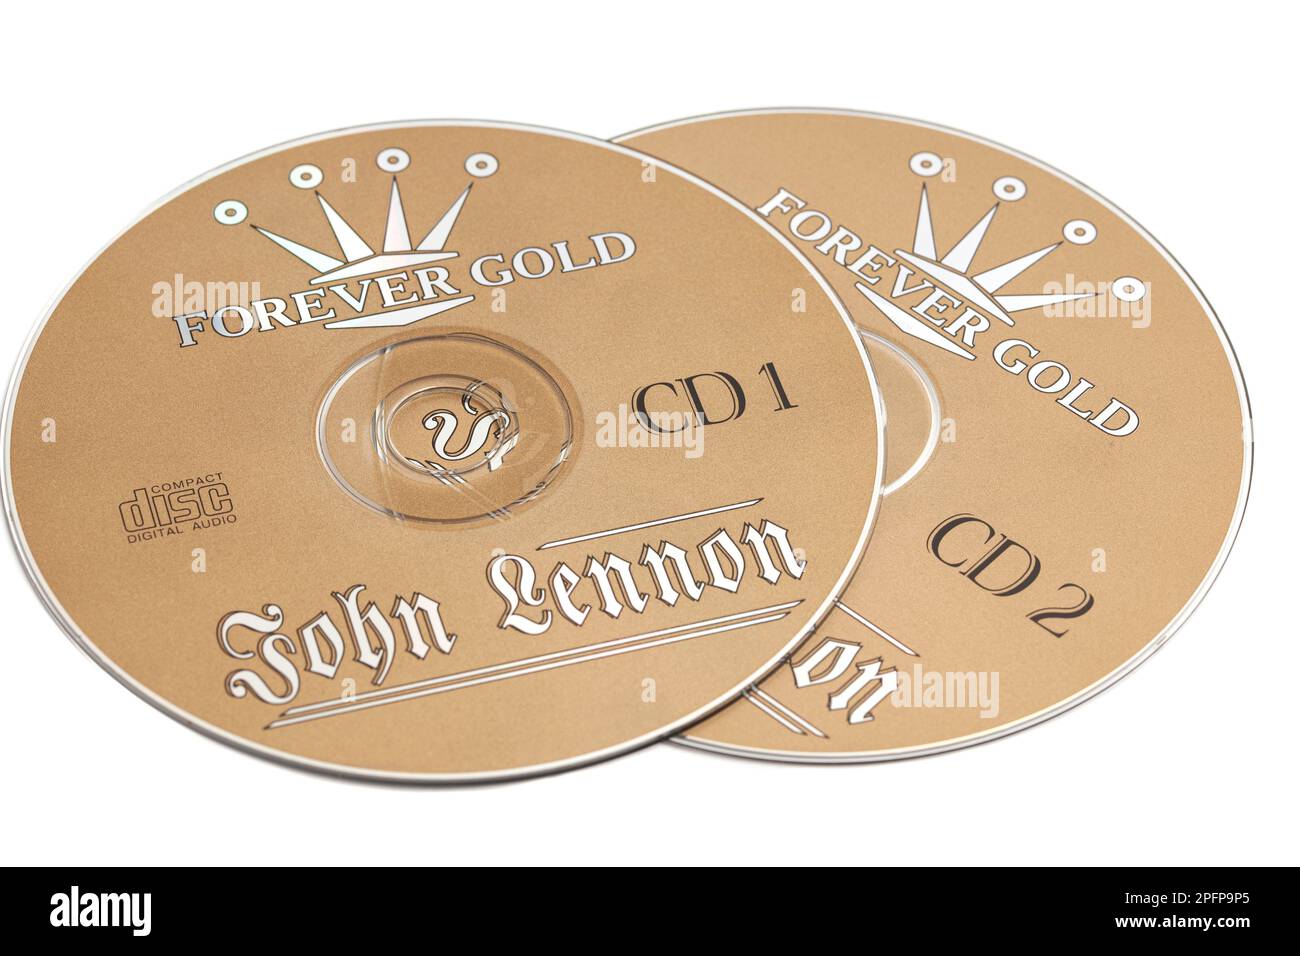 Moscow, Russia, 18 March 2023: CD discs by John Lennon - Forever Gold Stock Photo